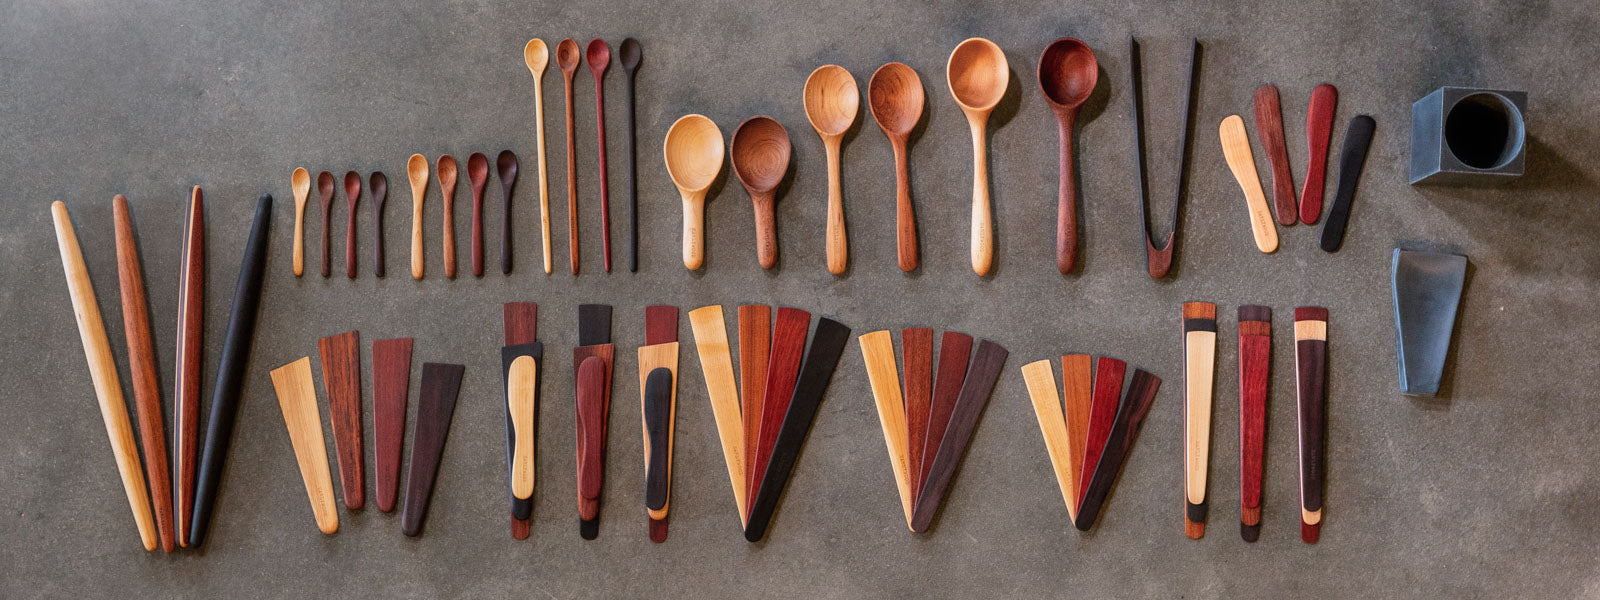 Entire Earlywood product line of wooden spoons and spatulas for cooking